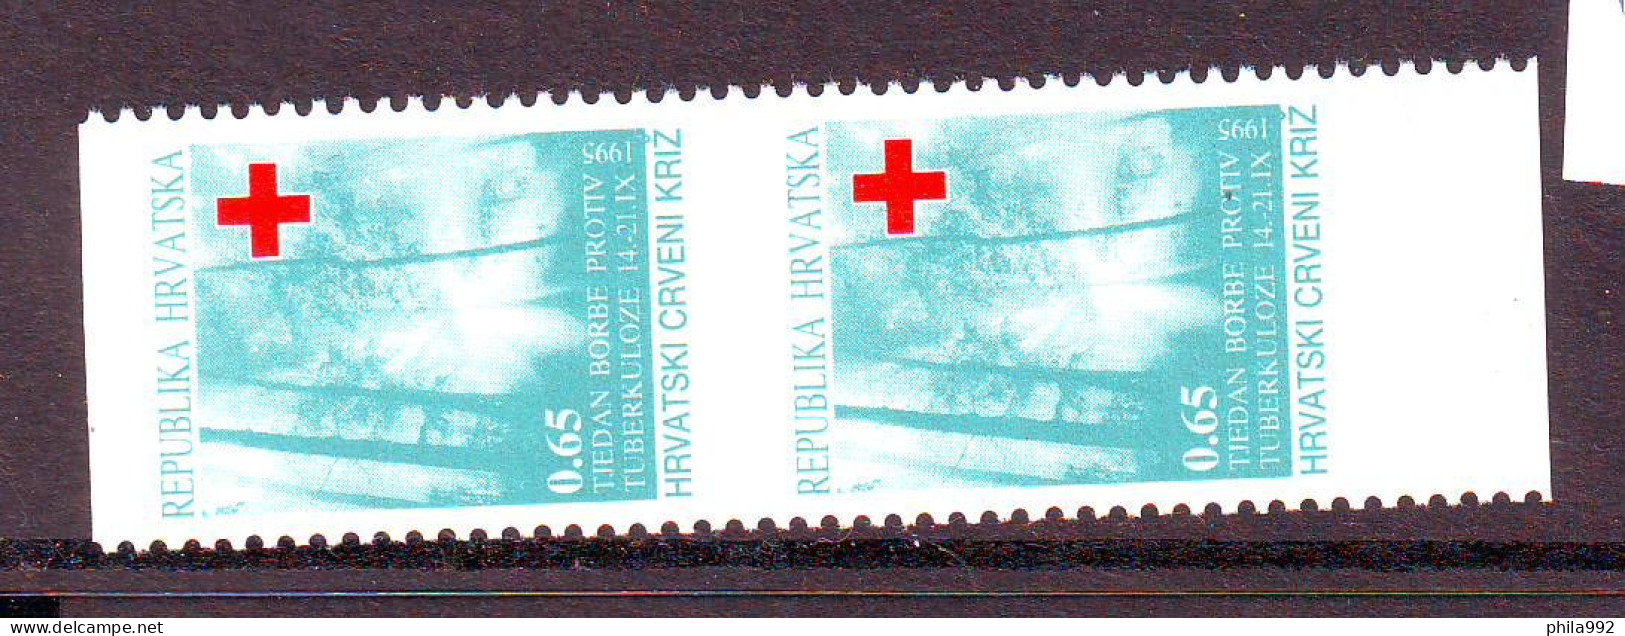 Croatia 1993 Charity Stamp Mi.No.69 RED CROSS TBC A Pair Without Horizontal Serrations MNH - Croatie